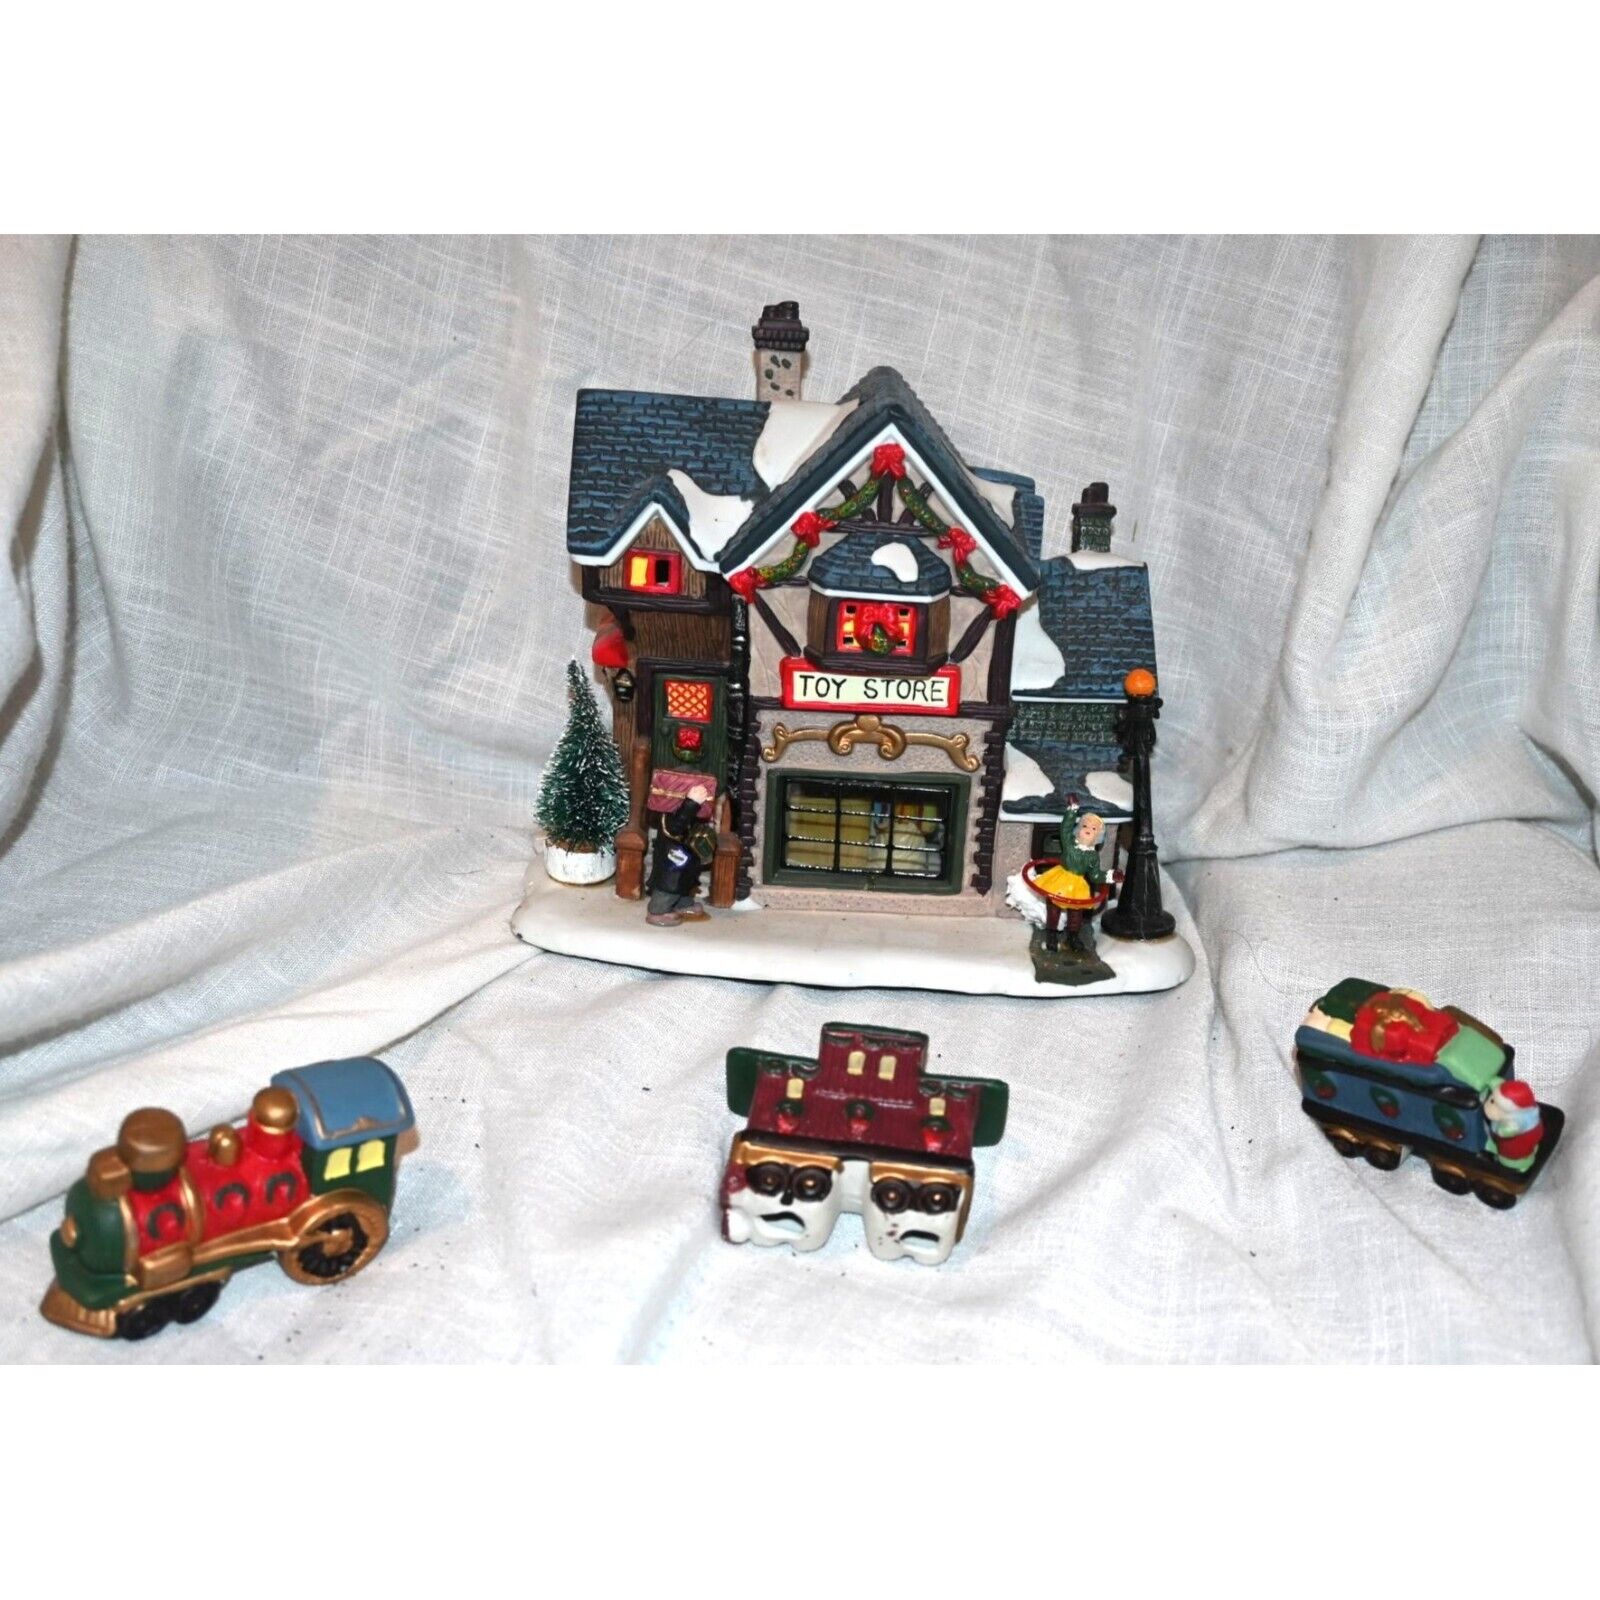 Vintage Toy Store and 3 Train Pieces for a Christmas Village